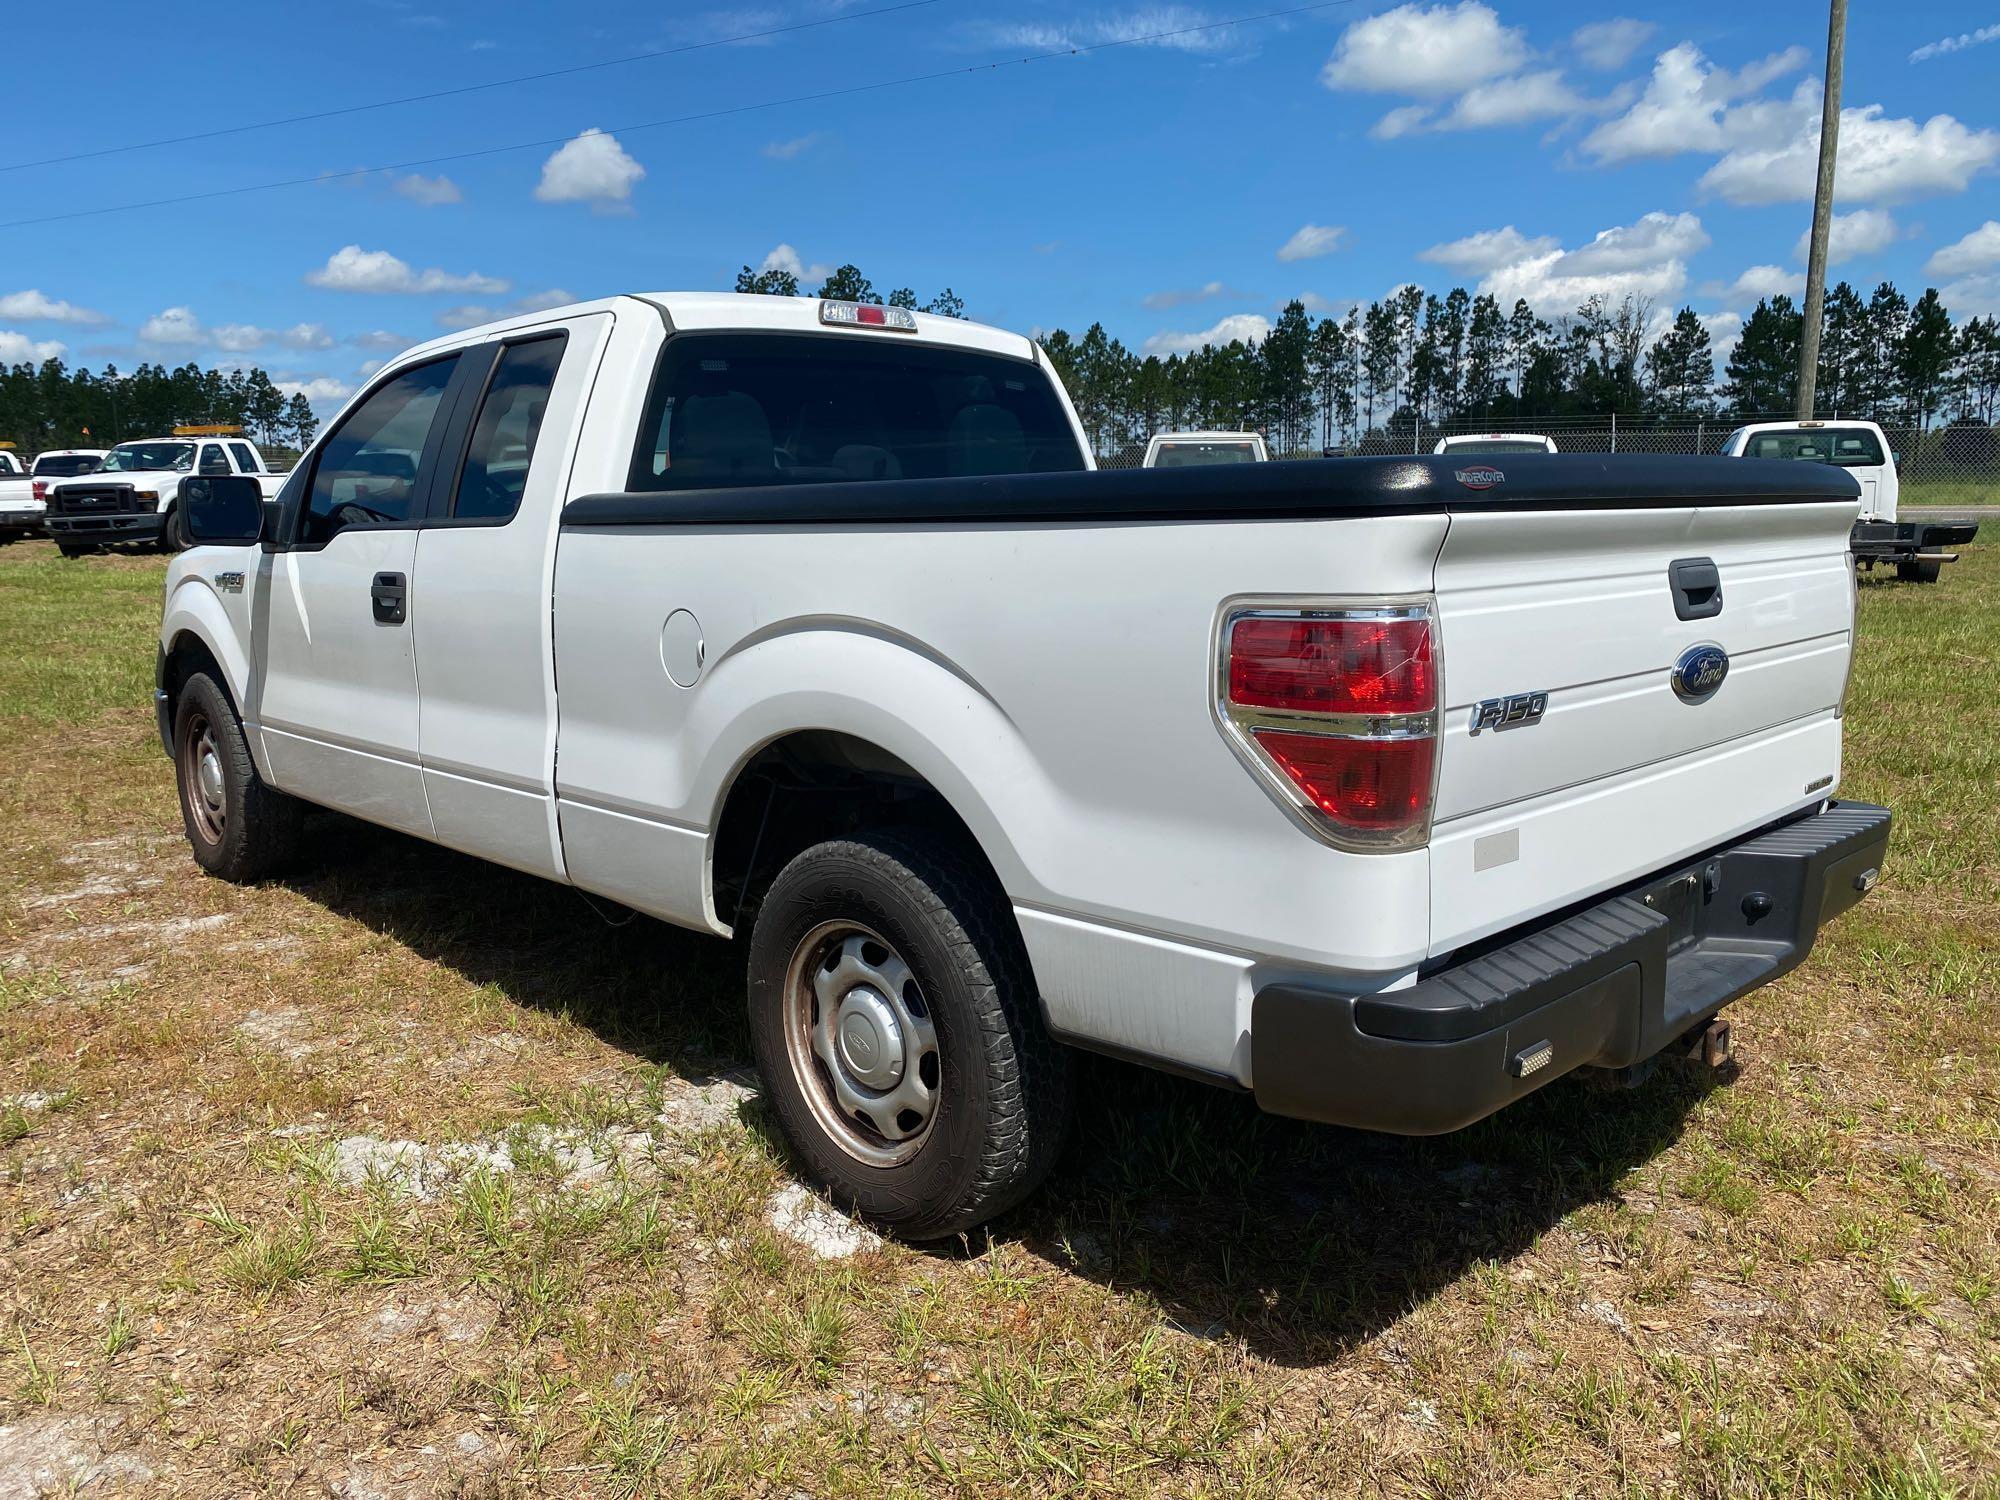 2013 Ford F-150 Extended Cab Pickup Truck